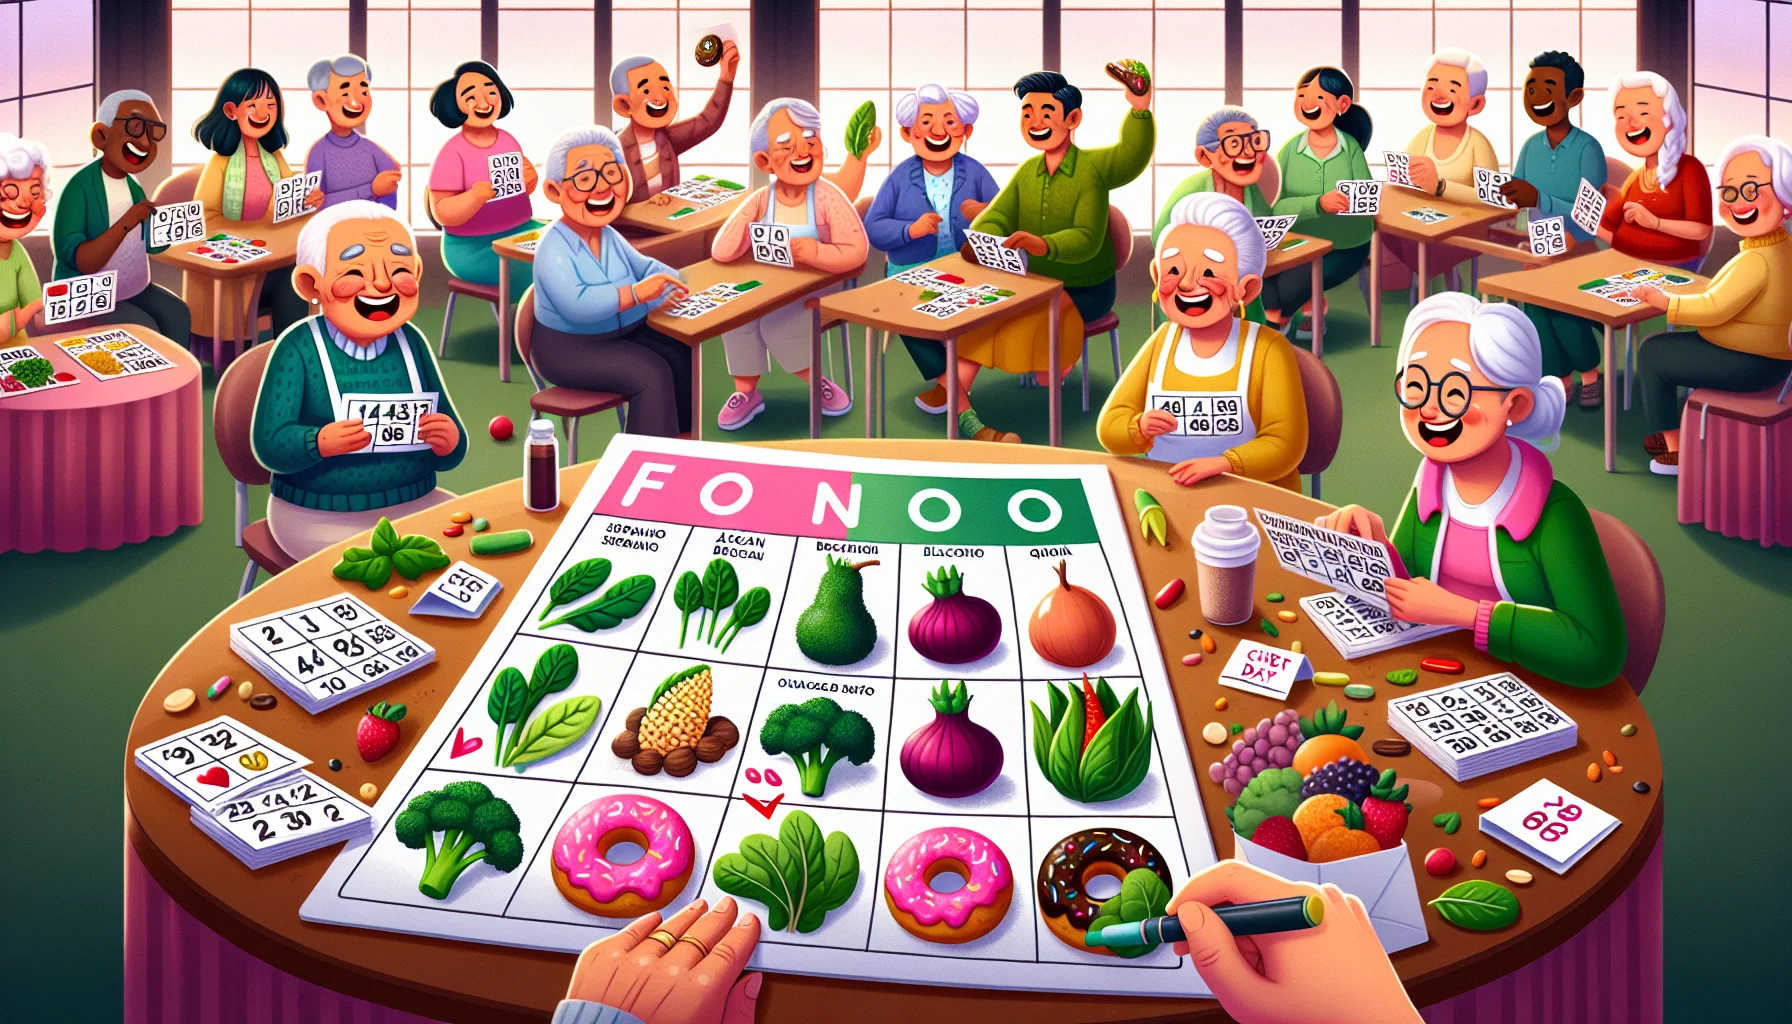 Design an amusing and realistic image capturing an array of food cards for seniors. Picture a scene with a lively bingo set-up, where instead of numbers on cards, there are colorful pictures of healthy foods like spinach, broccoli, and quinoa. Picture seniors laughing and joking around, each person of Asian, African, Hispanic, Middle Eastern, and Caucasian descent participating. They eagerly mark off healthy foods on their cards as they are being called out. Include in the scene a couple of seniors surreptitiously trading veggies for a 'cheat day' doughnut under the table, bringing a spark of humor to the notion of healthy eating.